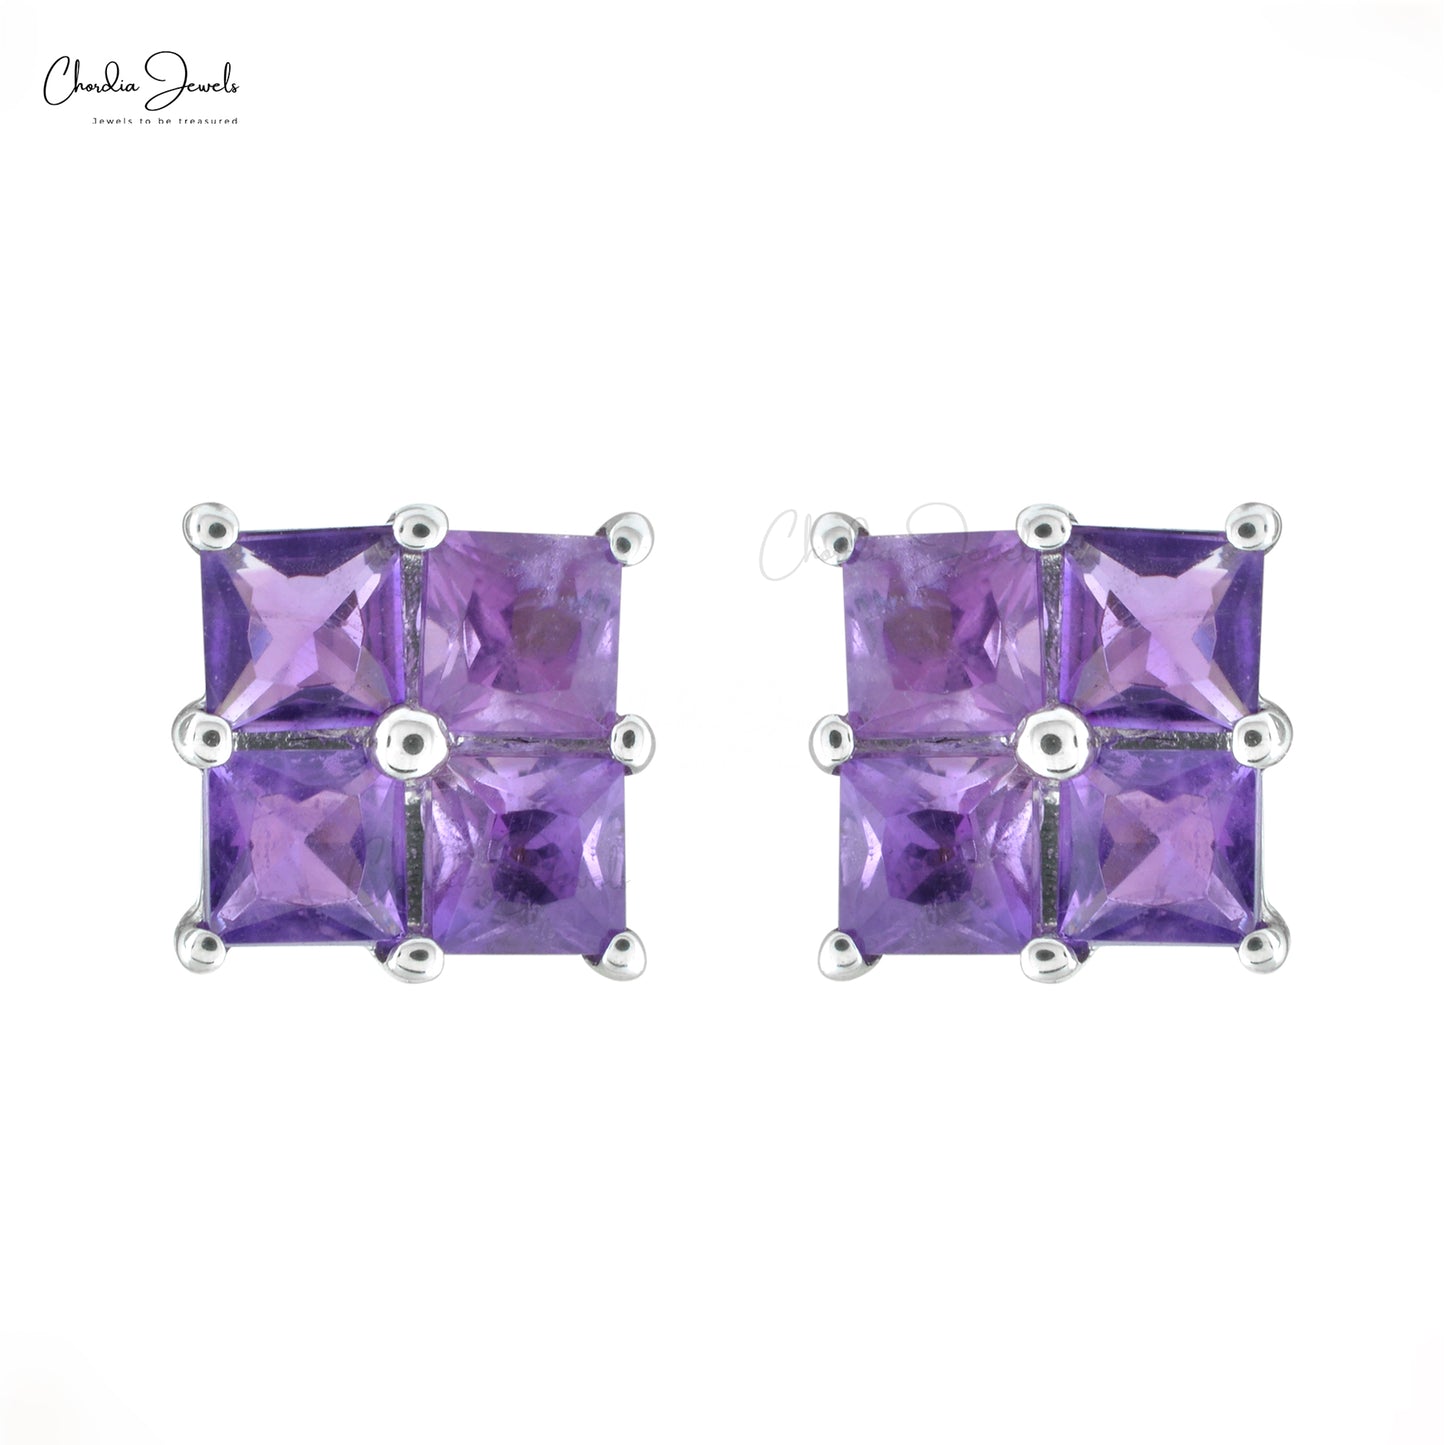 Real 14k White Gold Natural Amethyst Cluster Earrings 3mm Square Cut Gemstone Push Back Studs Grace Jewelry For February Birthstone